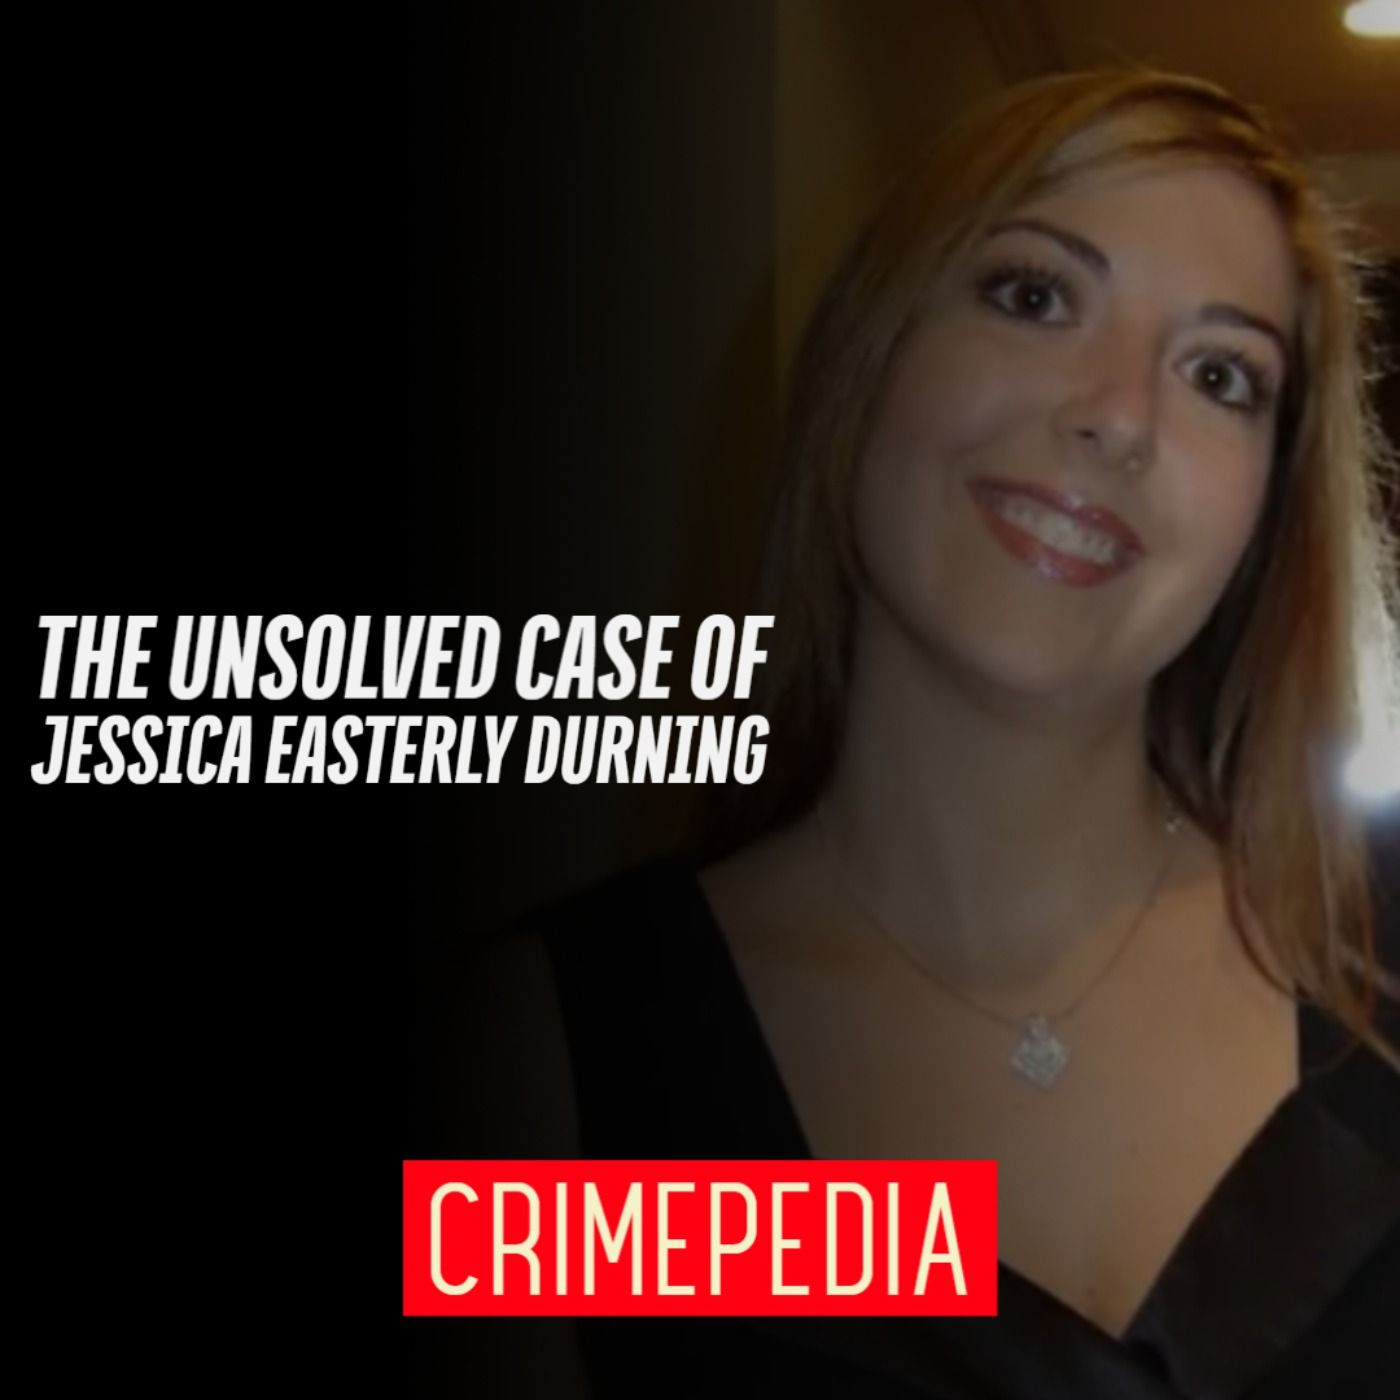 The Unsolved Case of Jessica Easterly Durning